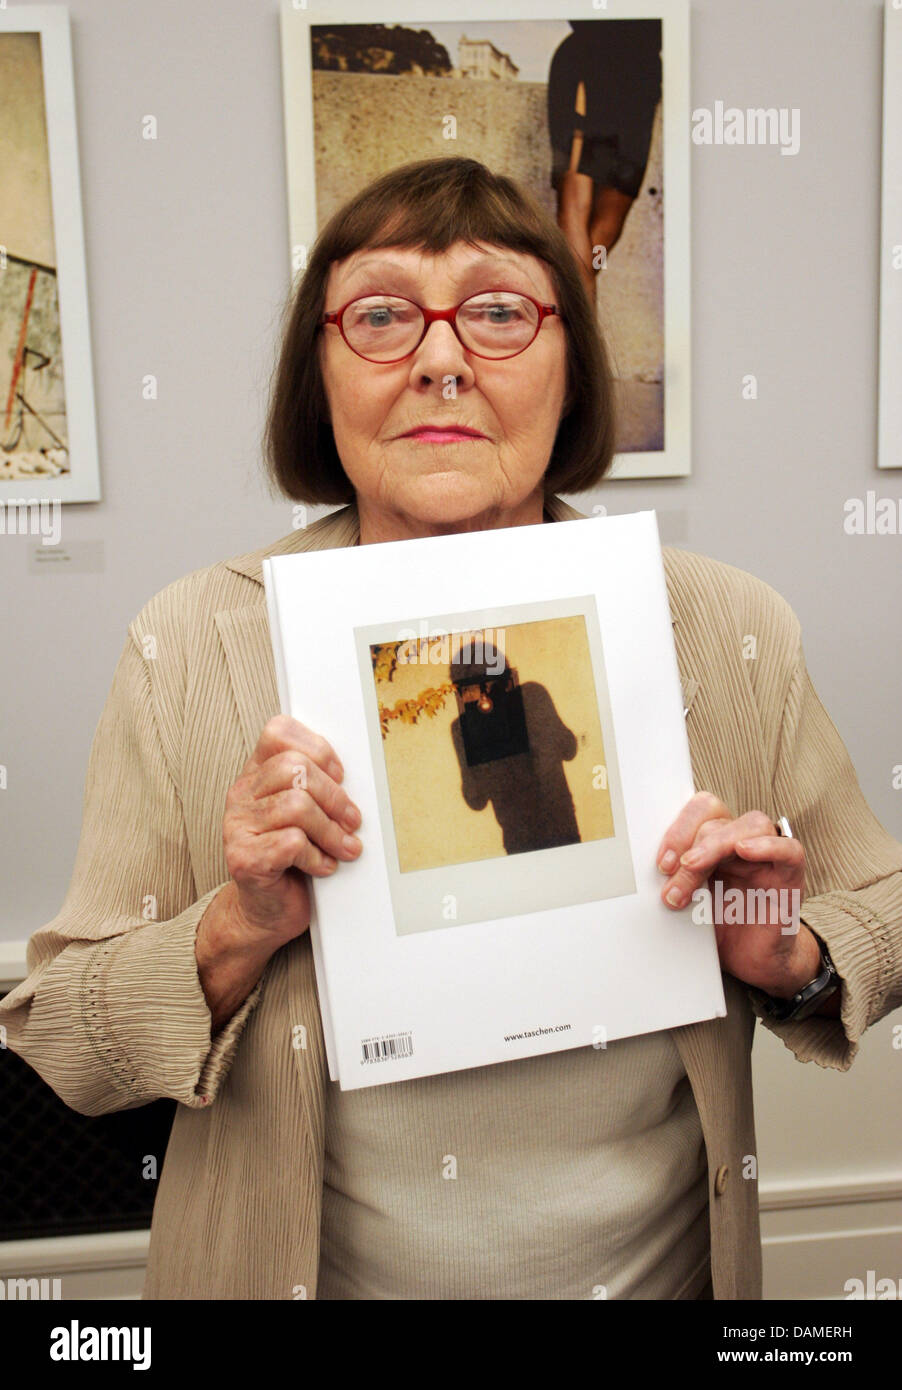 June Newton, widow of the photographer Helmut Newton, opens the exhibition  "Helmut Newton Polaroids" at the Museum for Photography in Berlin, Germany,  09 June 2011. Photo: Xamax Stock Photo - Alamy